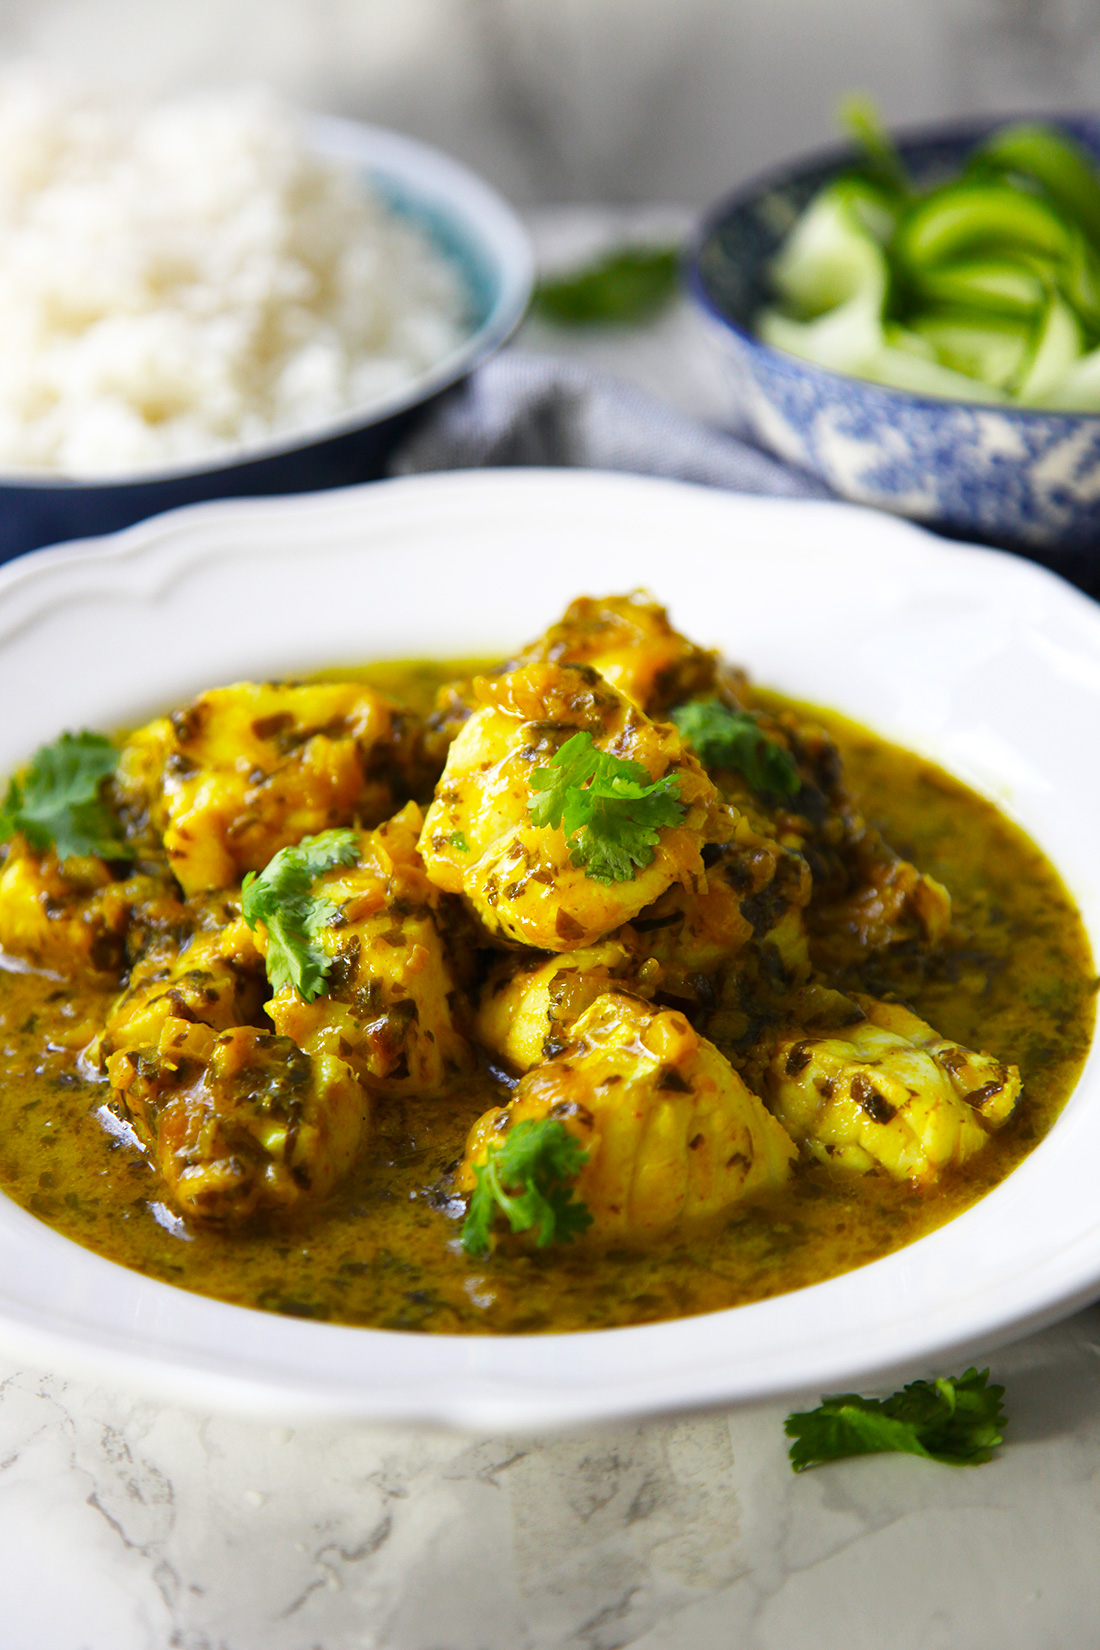 Tamarind and coriander fish is a delicious main dish that the whole family will love